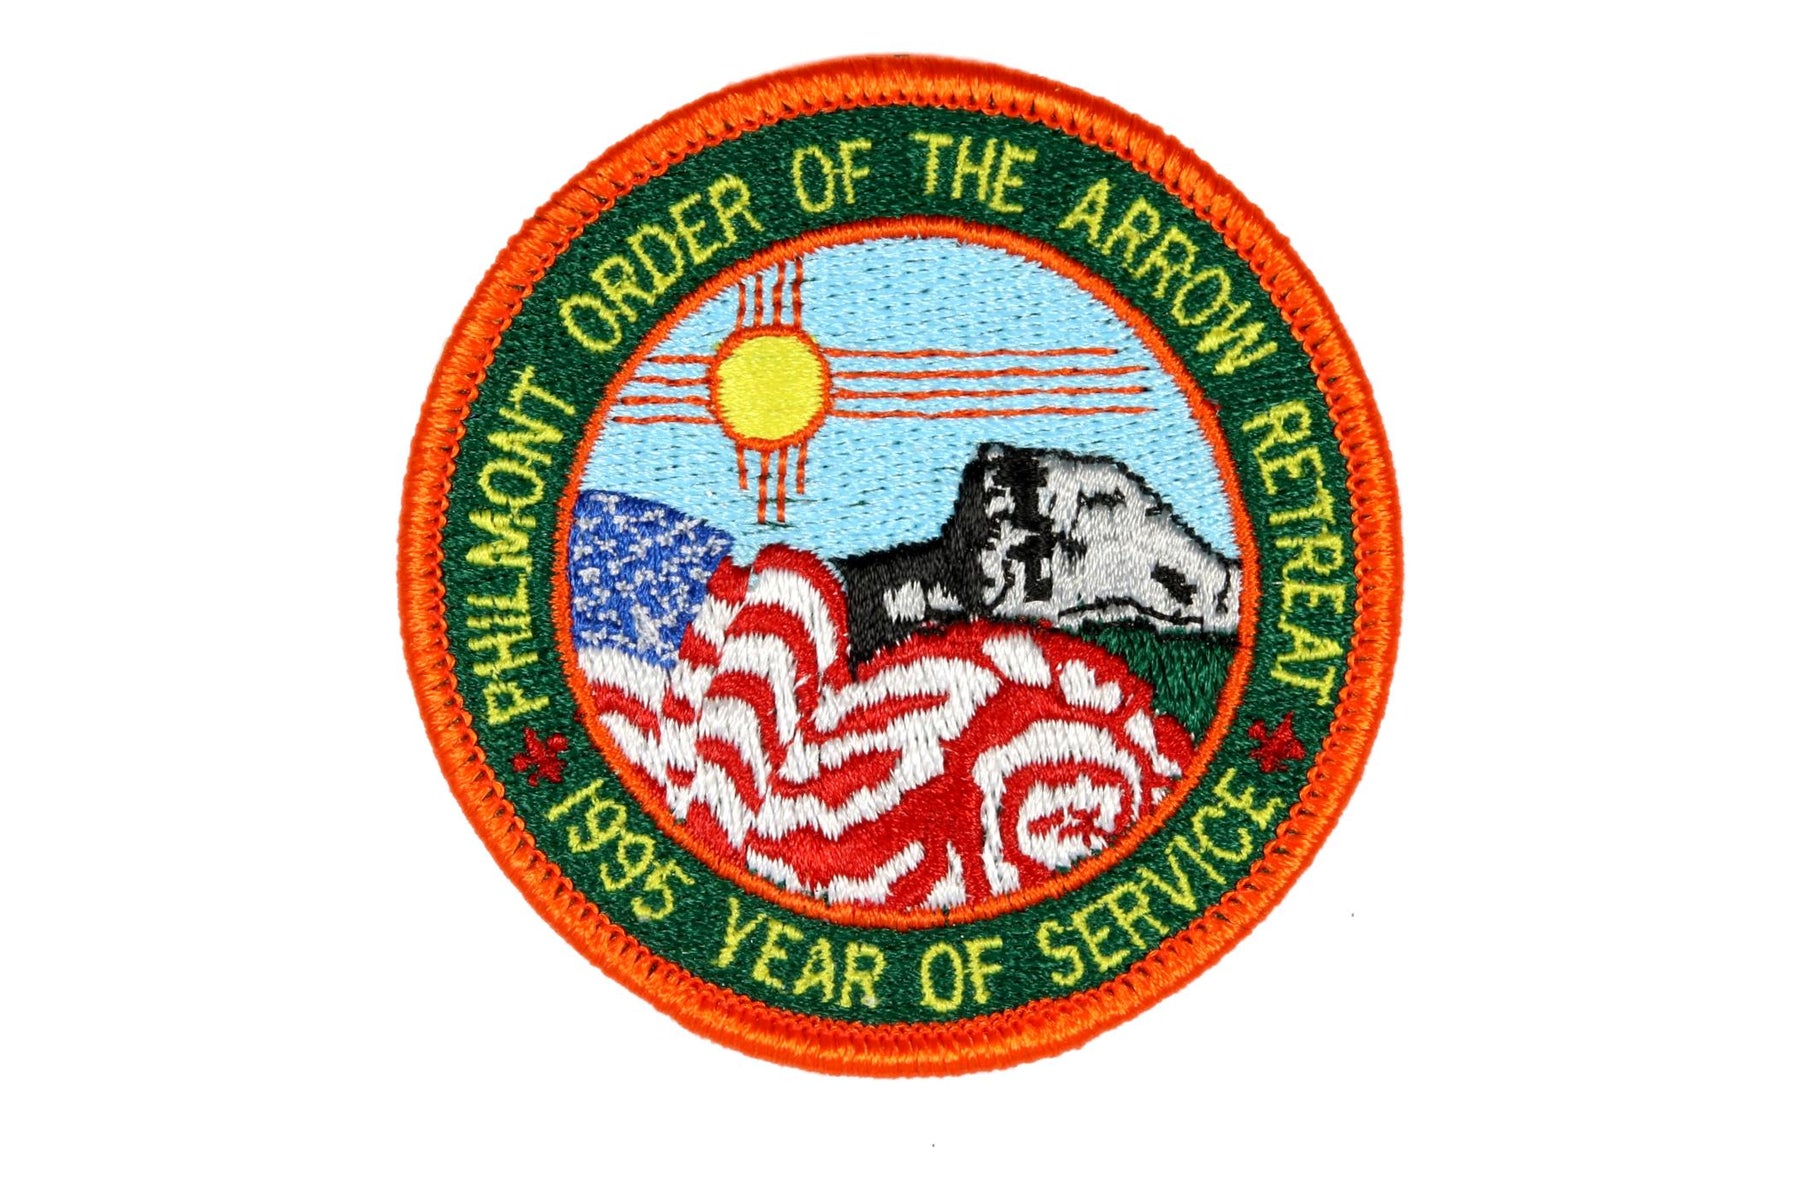 1995 Philmont OA Year of Service Patch